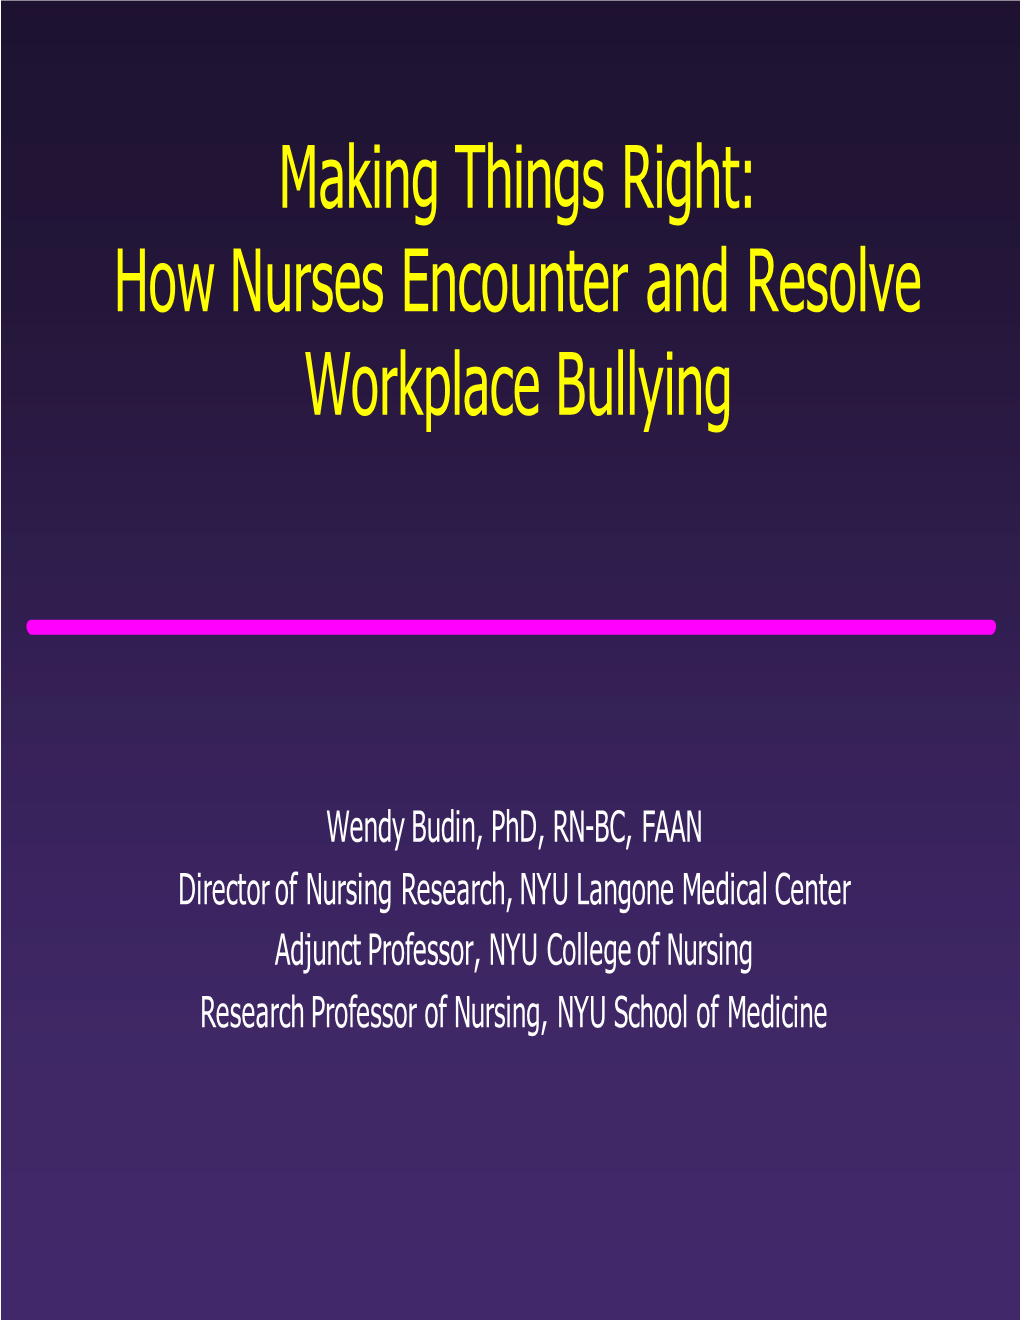 Making Things Right: How Nurses Encounter and Resolve Workplace Bullying